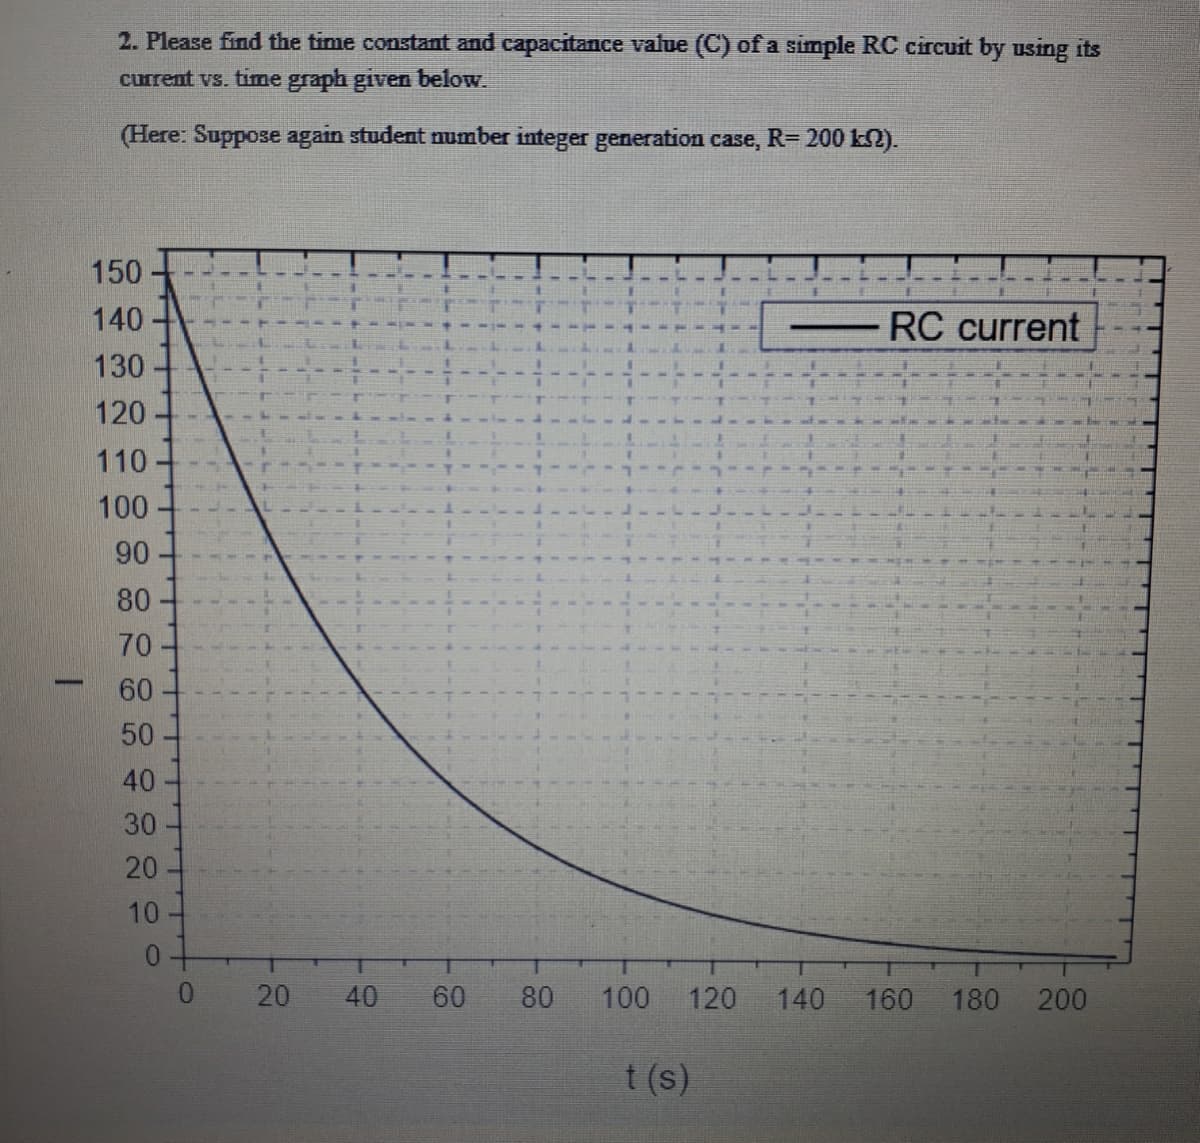 2. Please find the time constant and capacitance value (C) of a simple RC circuit by using its
current vs. timne graph given below.
(Here: Suppose again student number integer generation case, R= 200 kN).
150
140
RC current
130
120
110
100
90
80
70
60
50
40
30
20
60
80
100
120
140
160
180
200
t (s)
40
20
10
